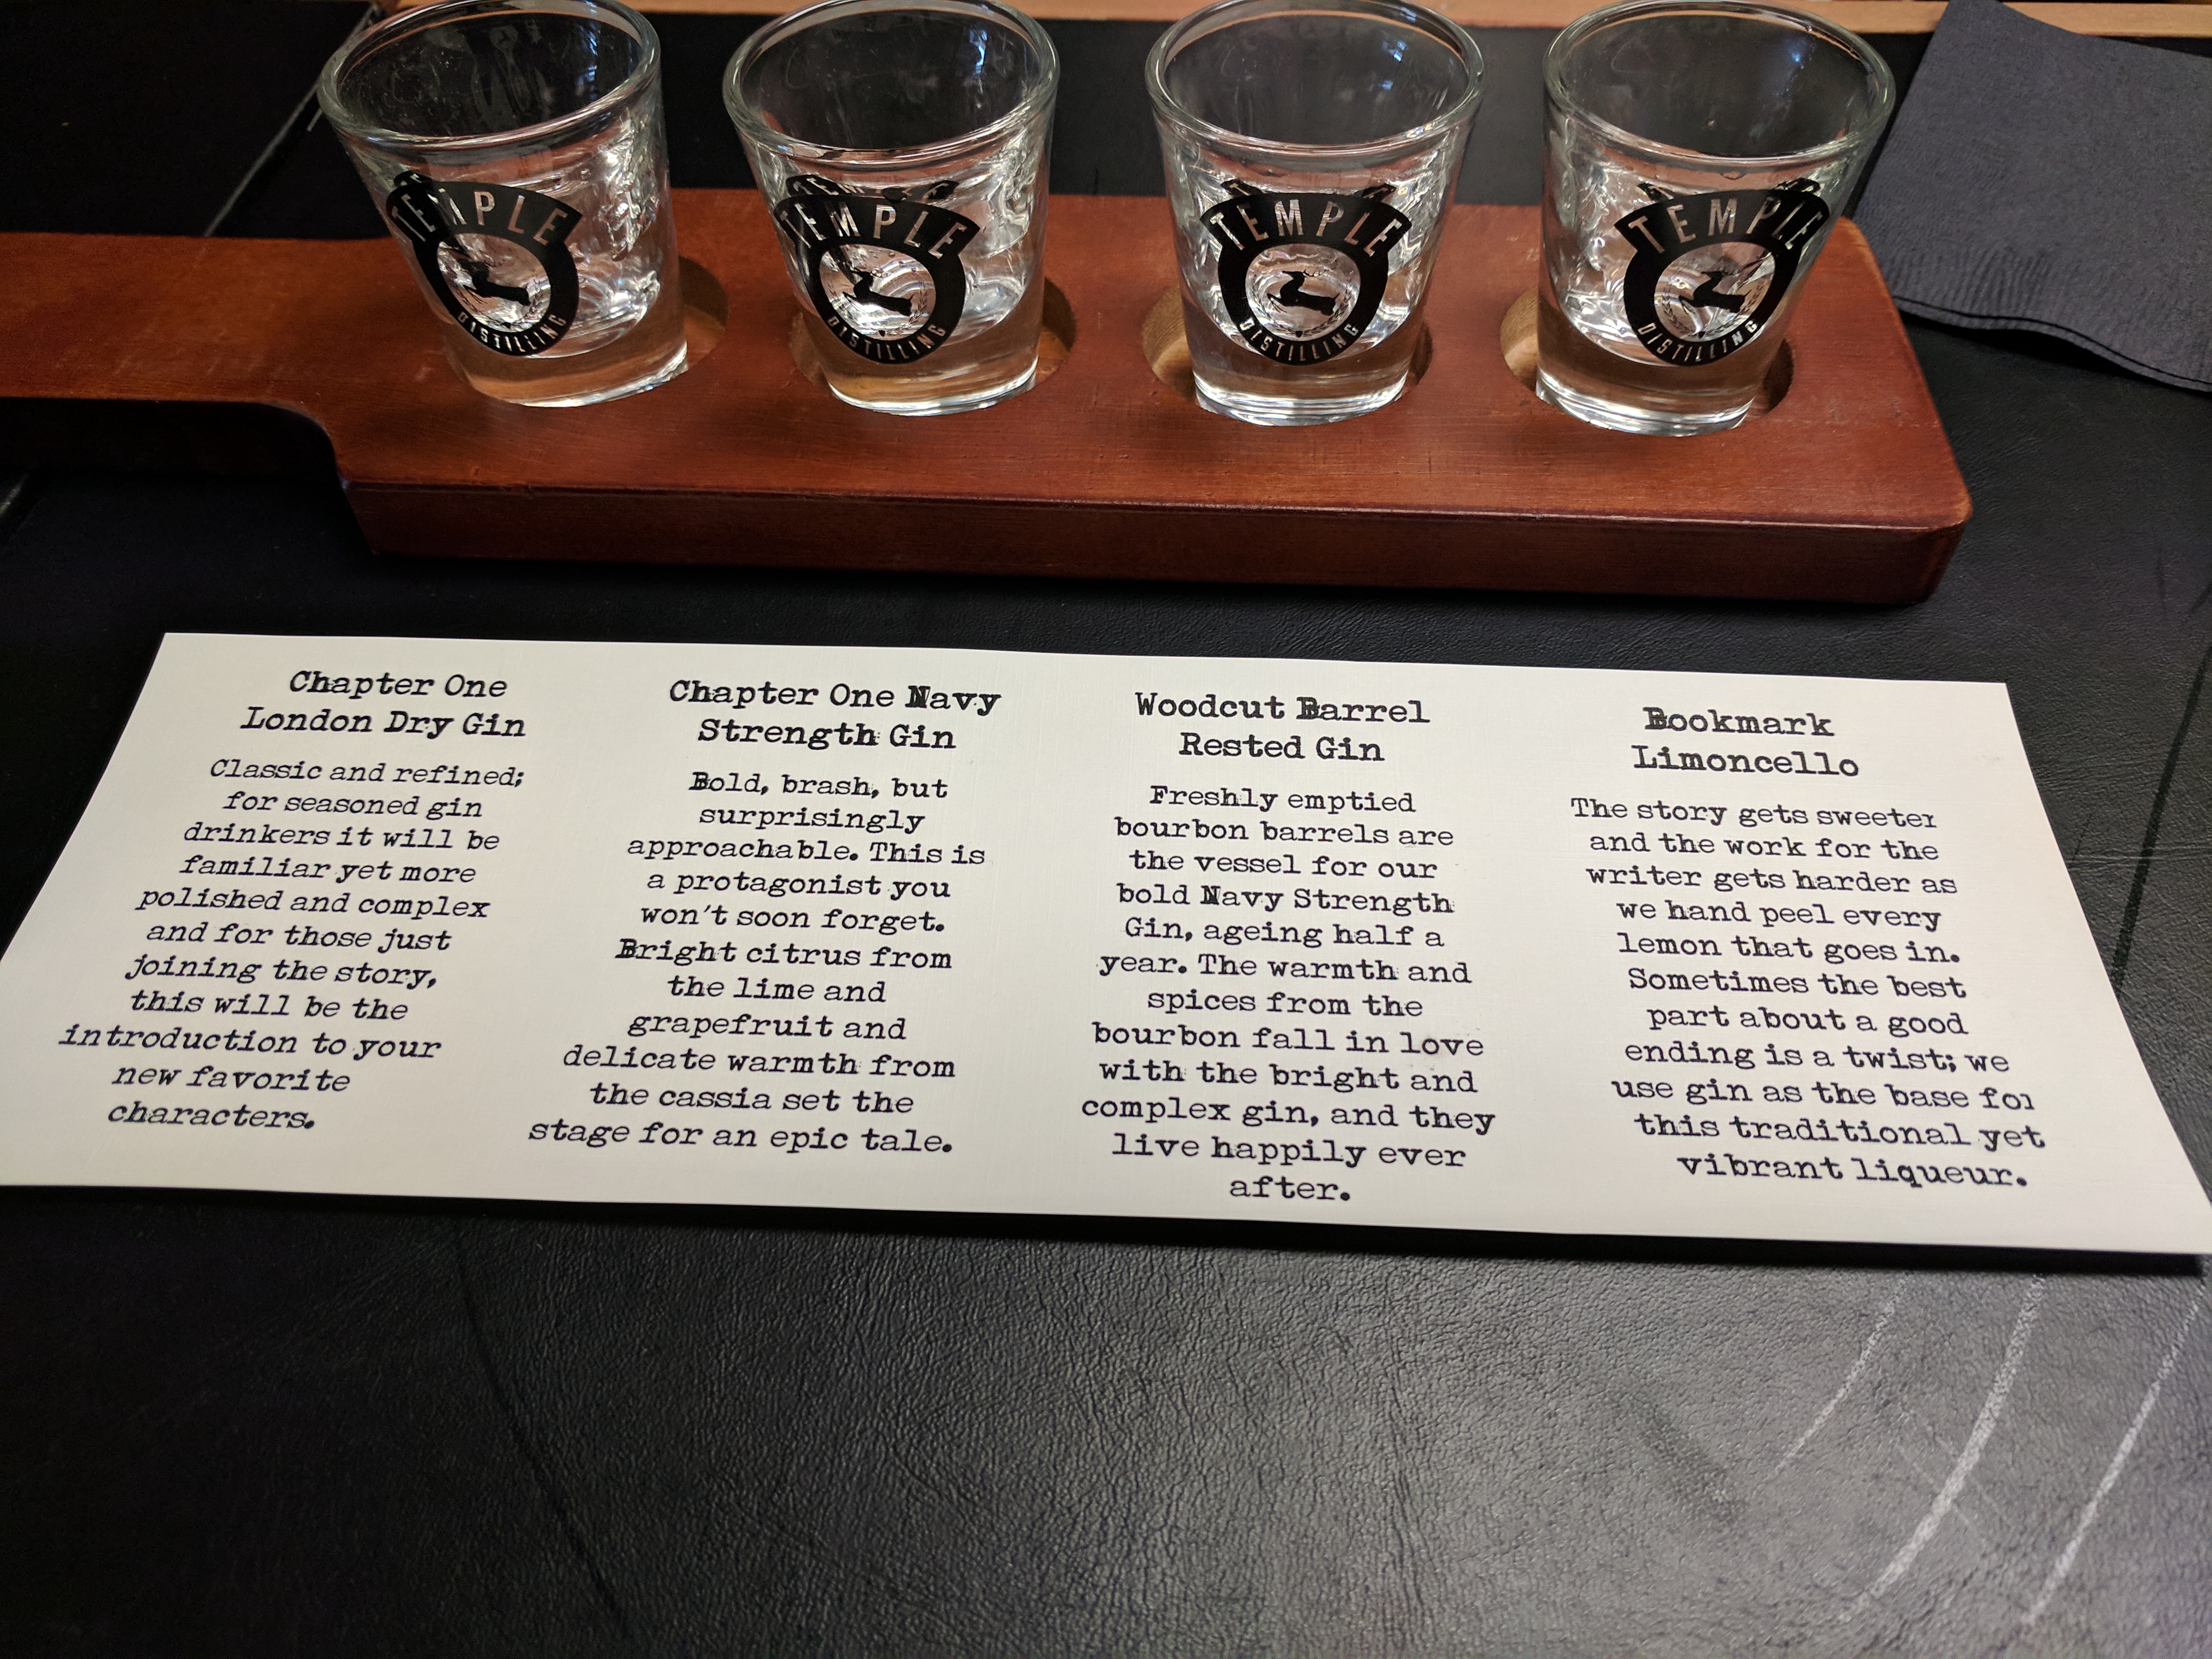 A Visit to Temple Distilling